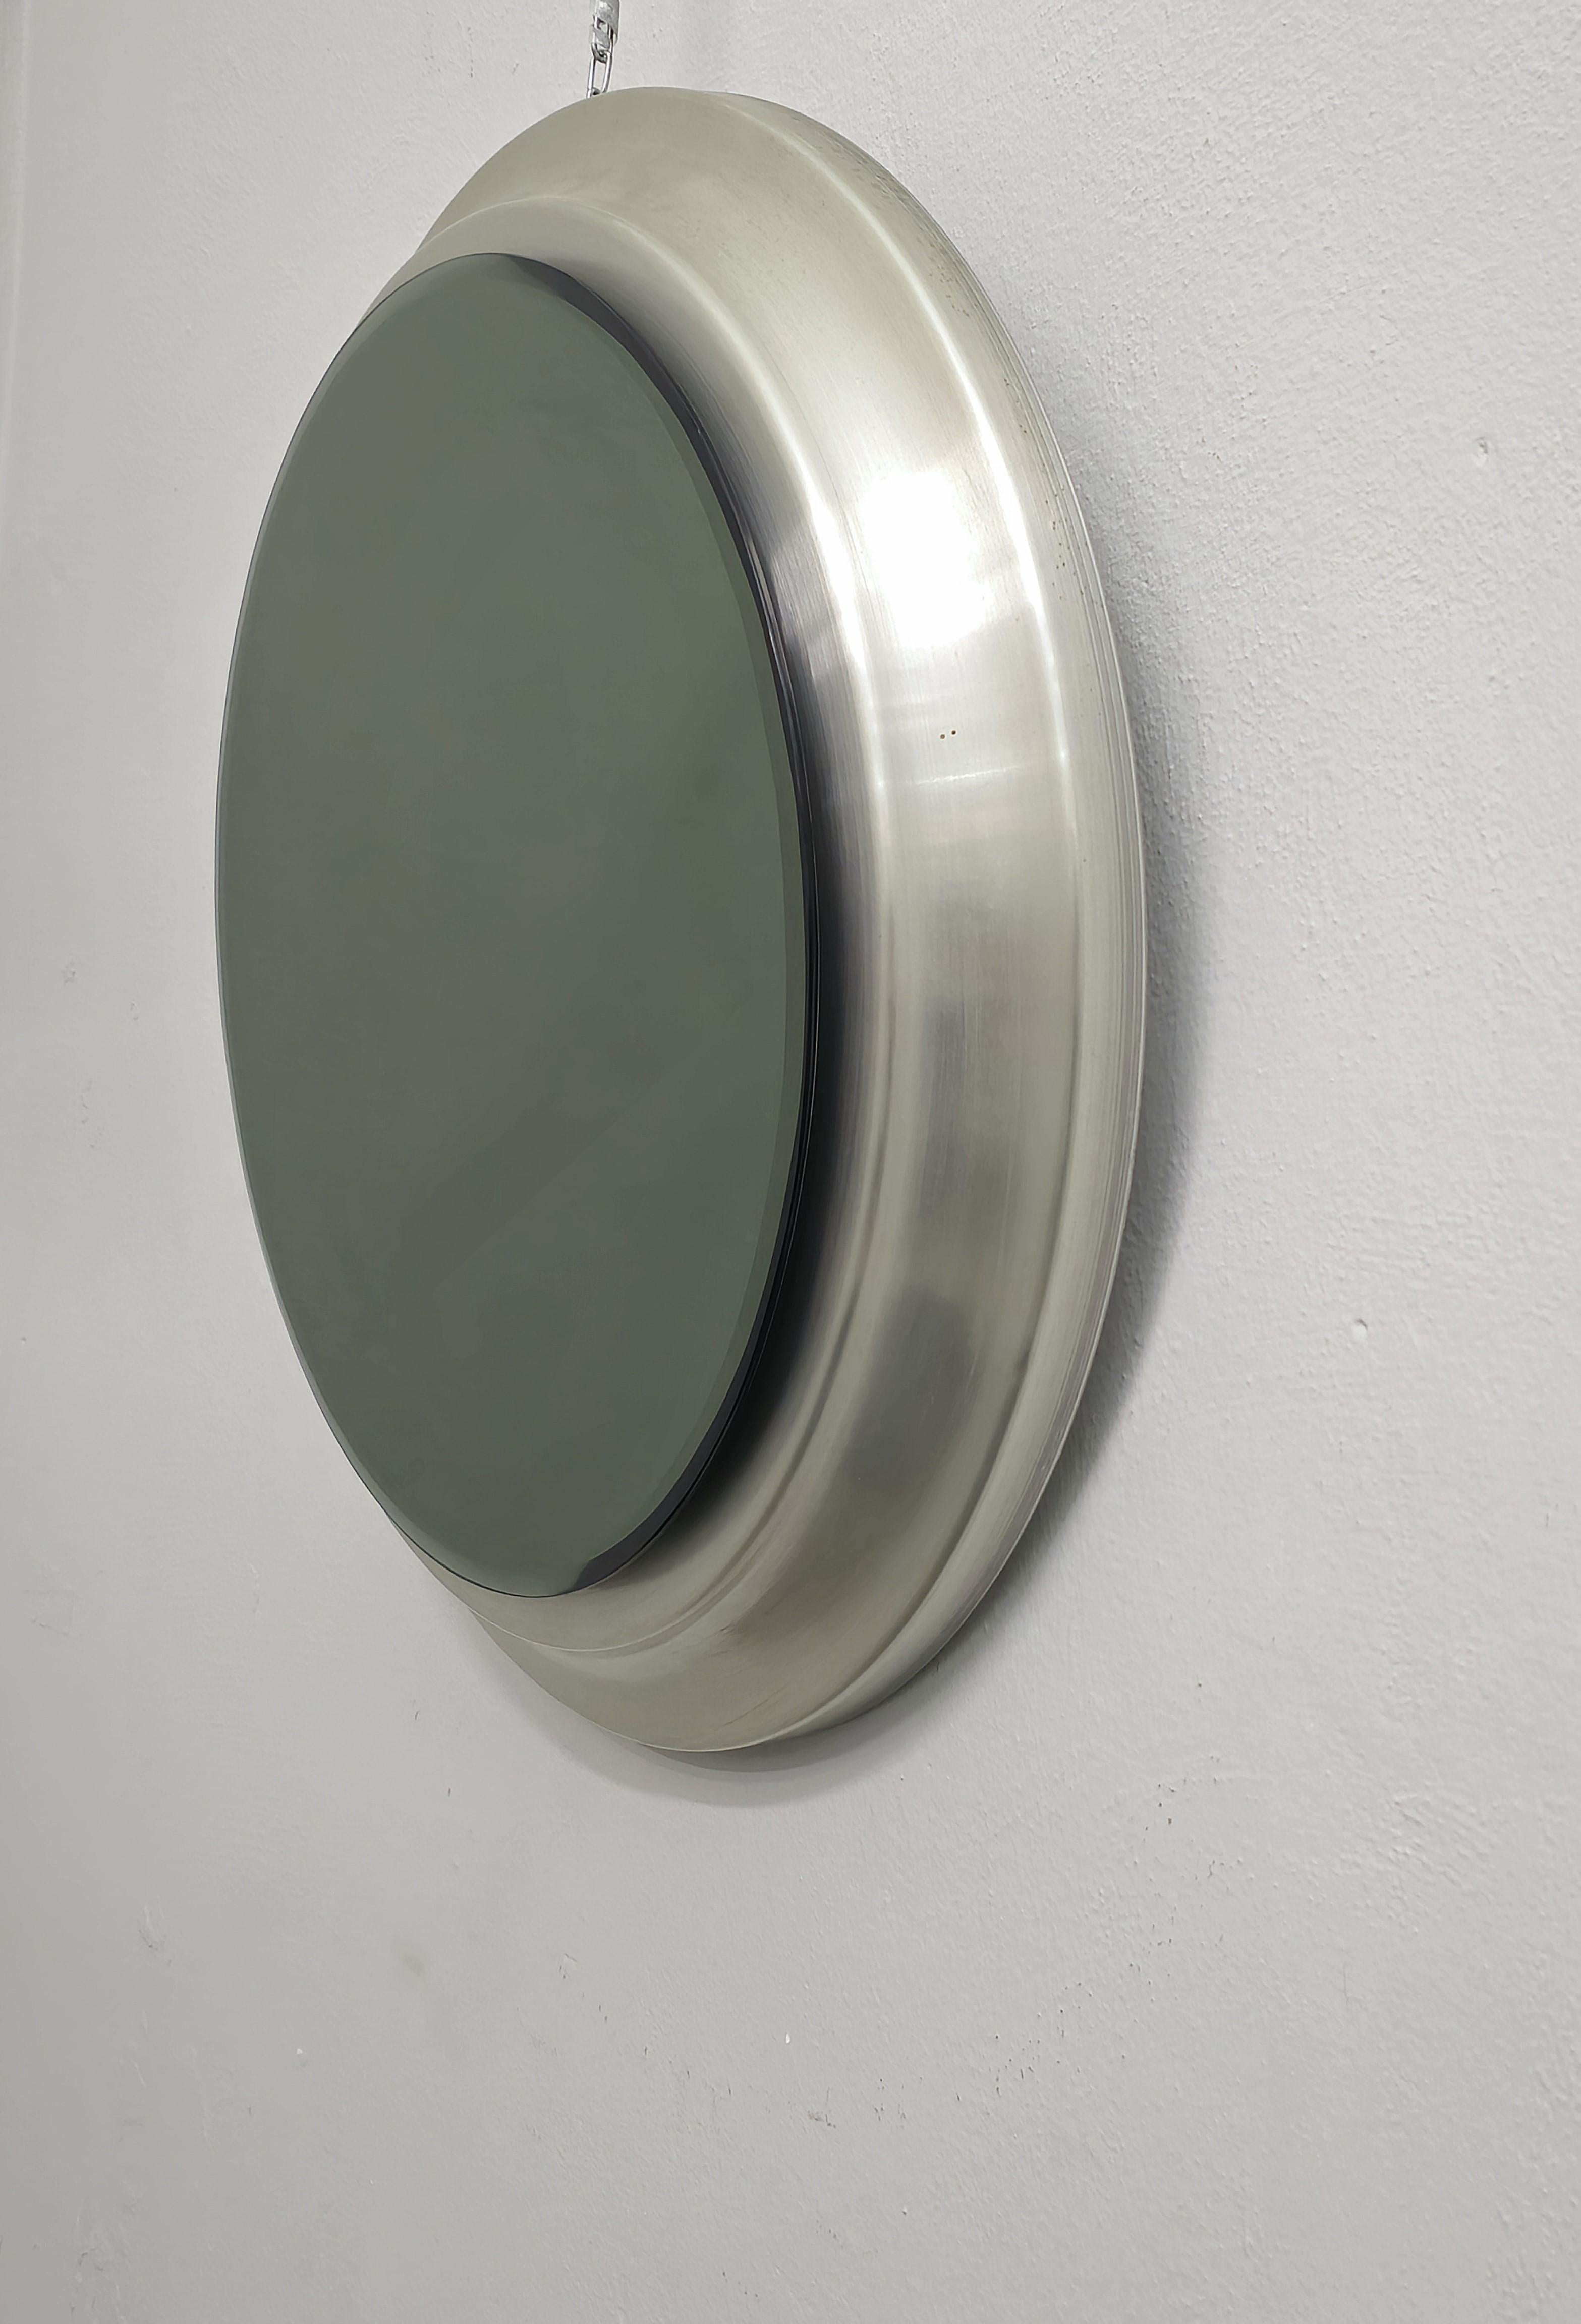 20th Century Wall Mirror Smoked Glass Brushed Aluminum Midcentury Italian Design 1970s For Sale